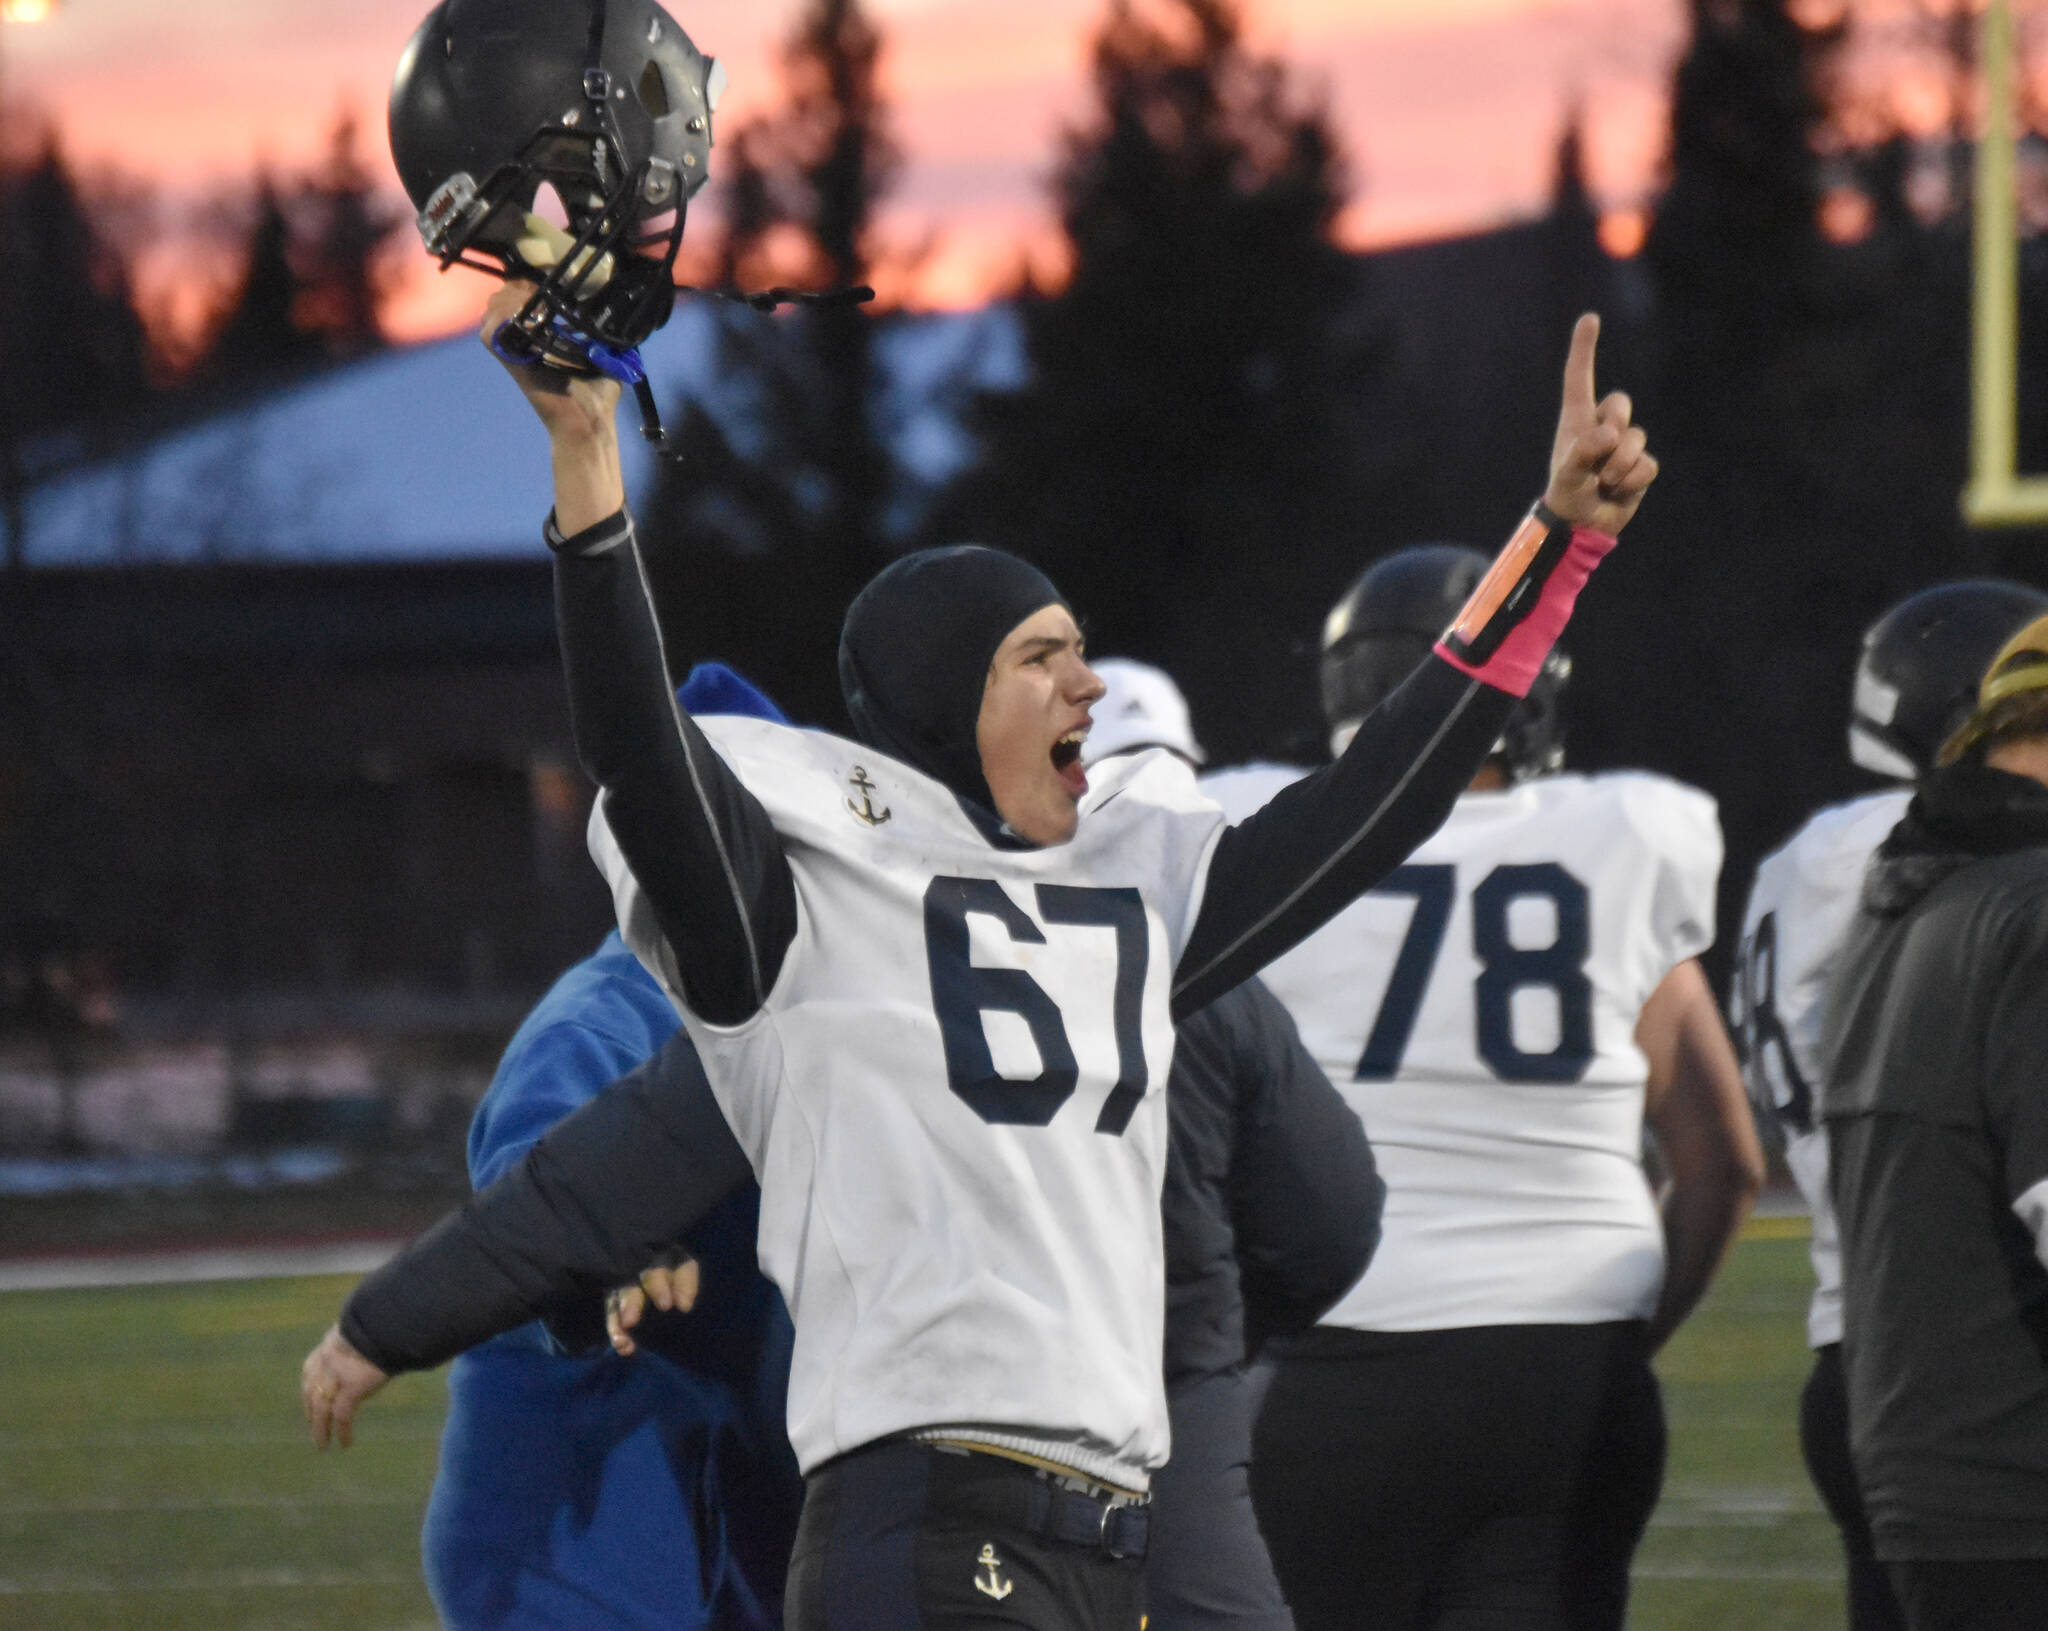 Homer’s Owen Storm celebrates Saturday, Oct. 15, 2022, at the Division III state championship game at Service High School in Anchorage, Alaska. (Photo by Jeff Helminiak/Peninsula Clarion)